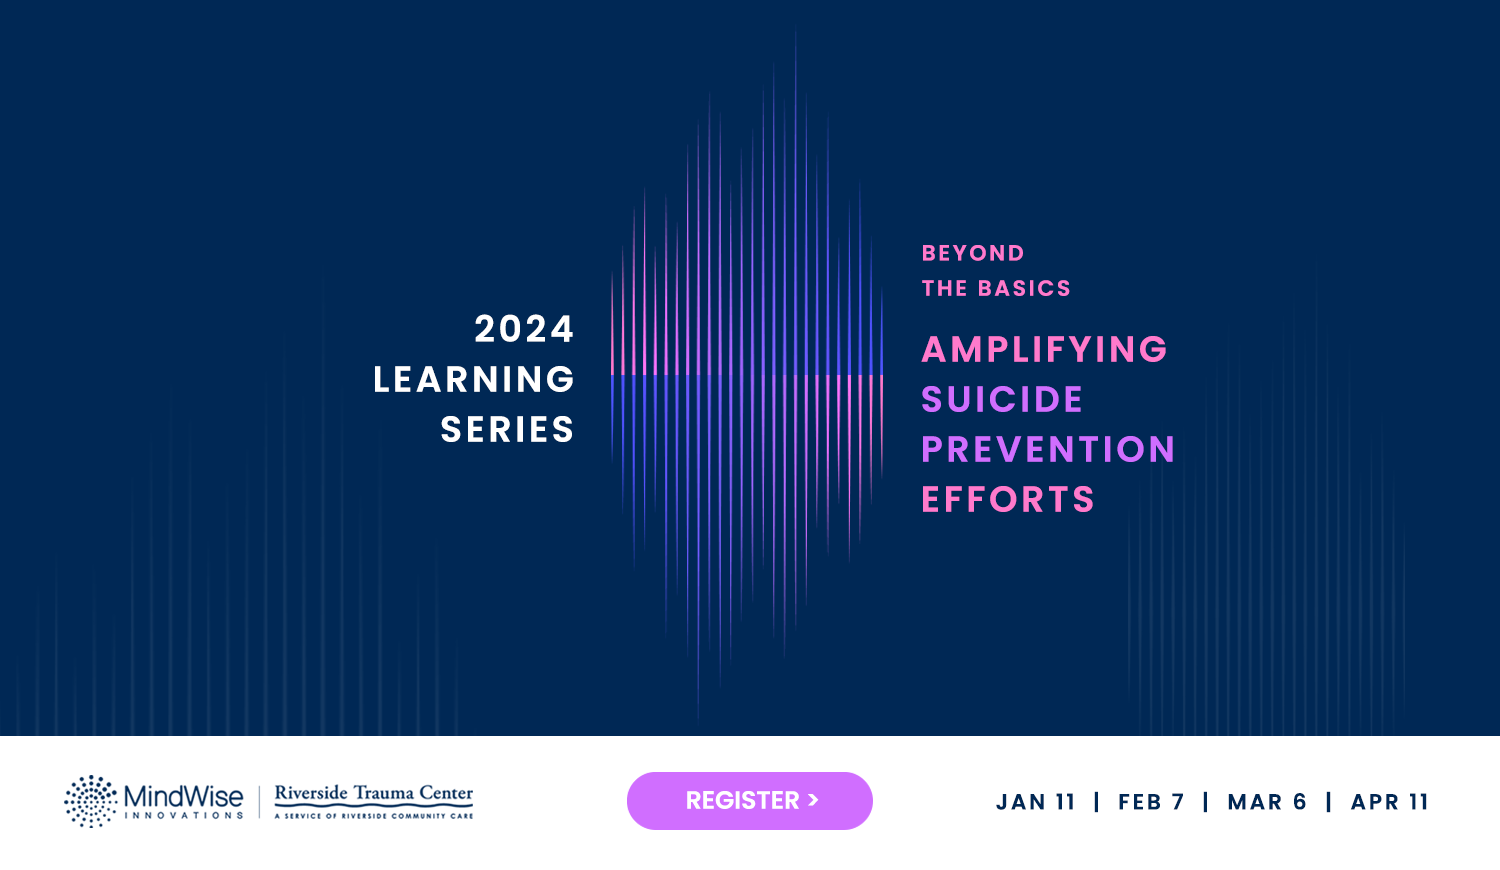 Register for the 2024 Learning Series